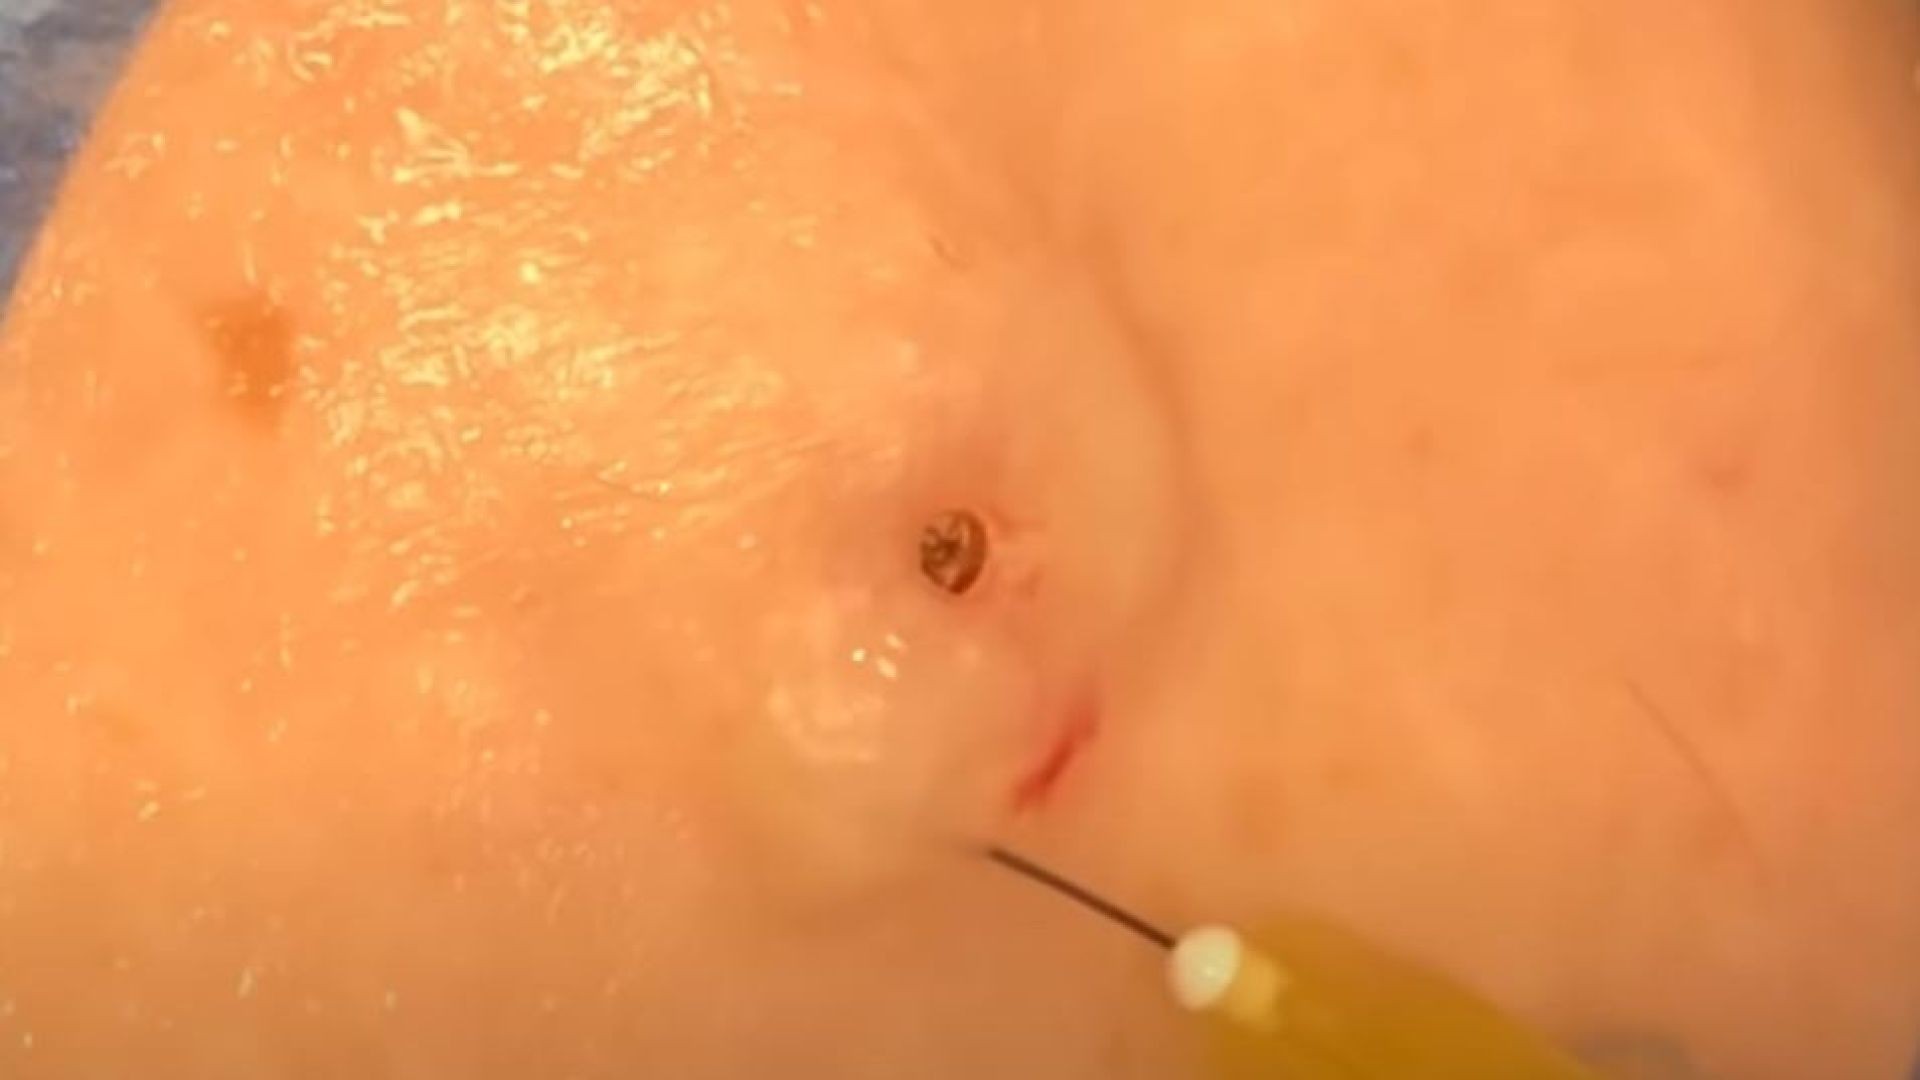 Cyst Explodes Just Missing Camera, Doctor Works Hard to Extract it All!